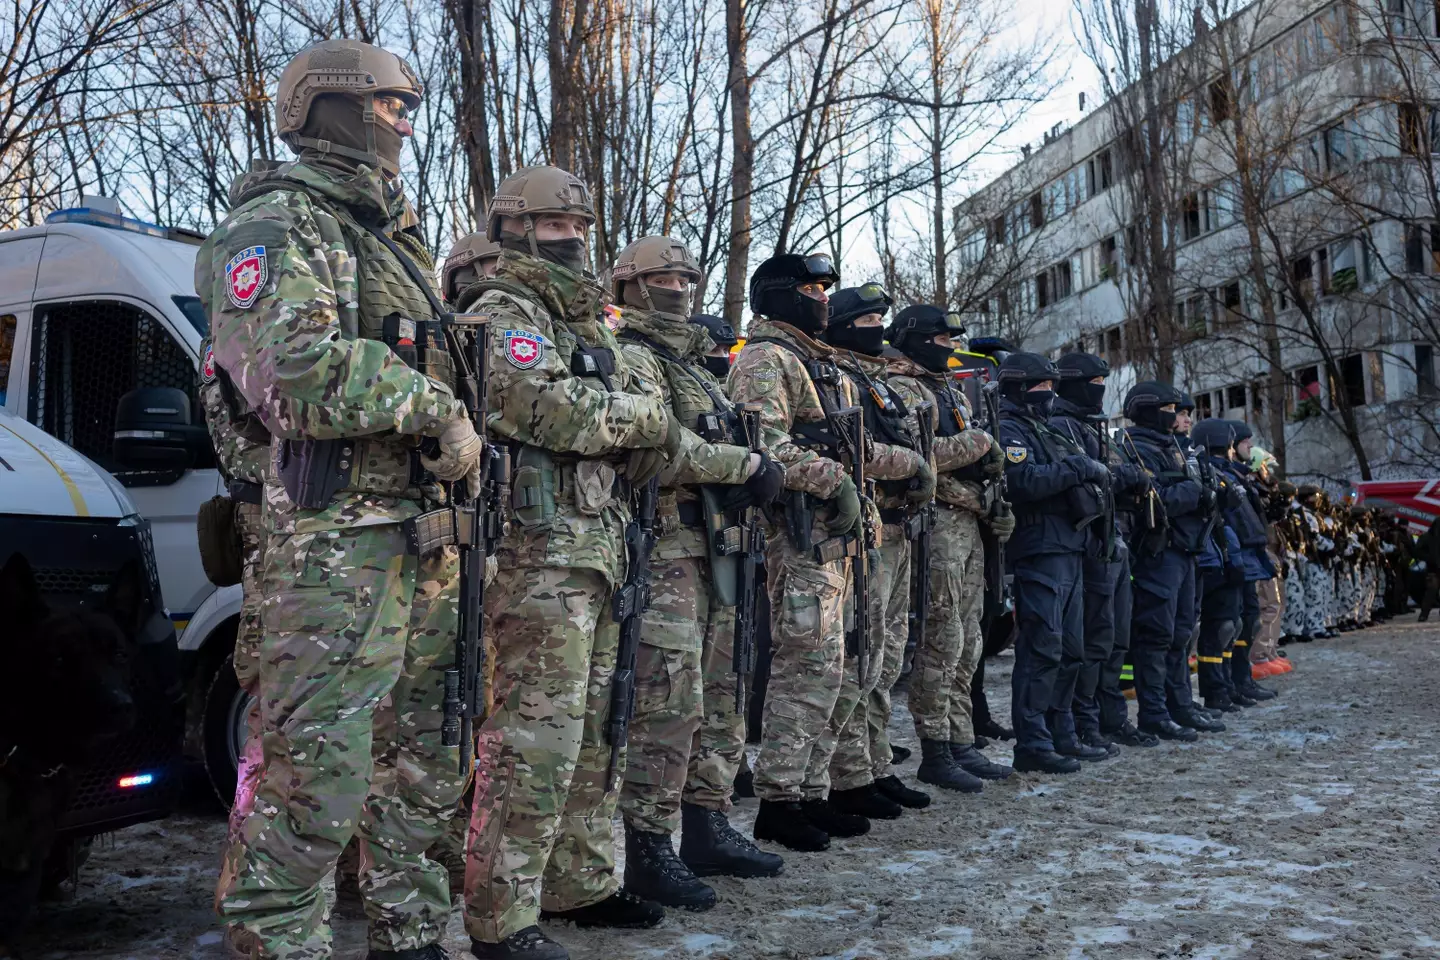 Soldiers of the National Guard Of Ukraine have been conducting military exercises near Chernobyl.